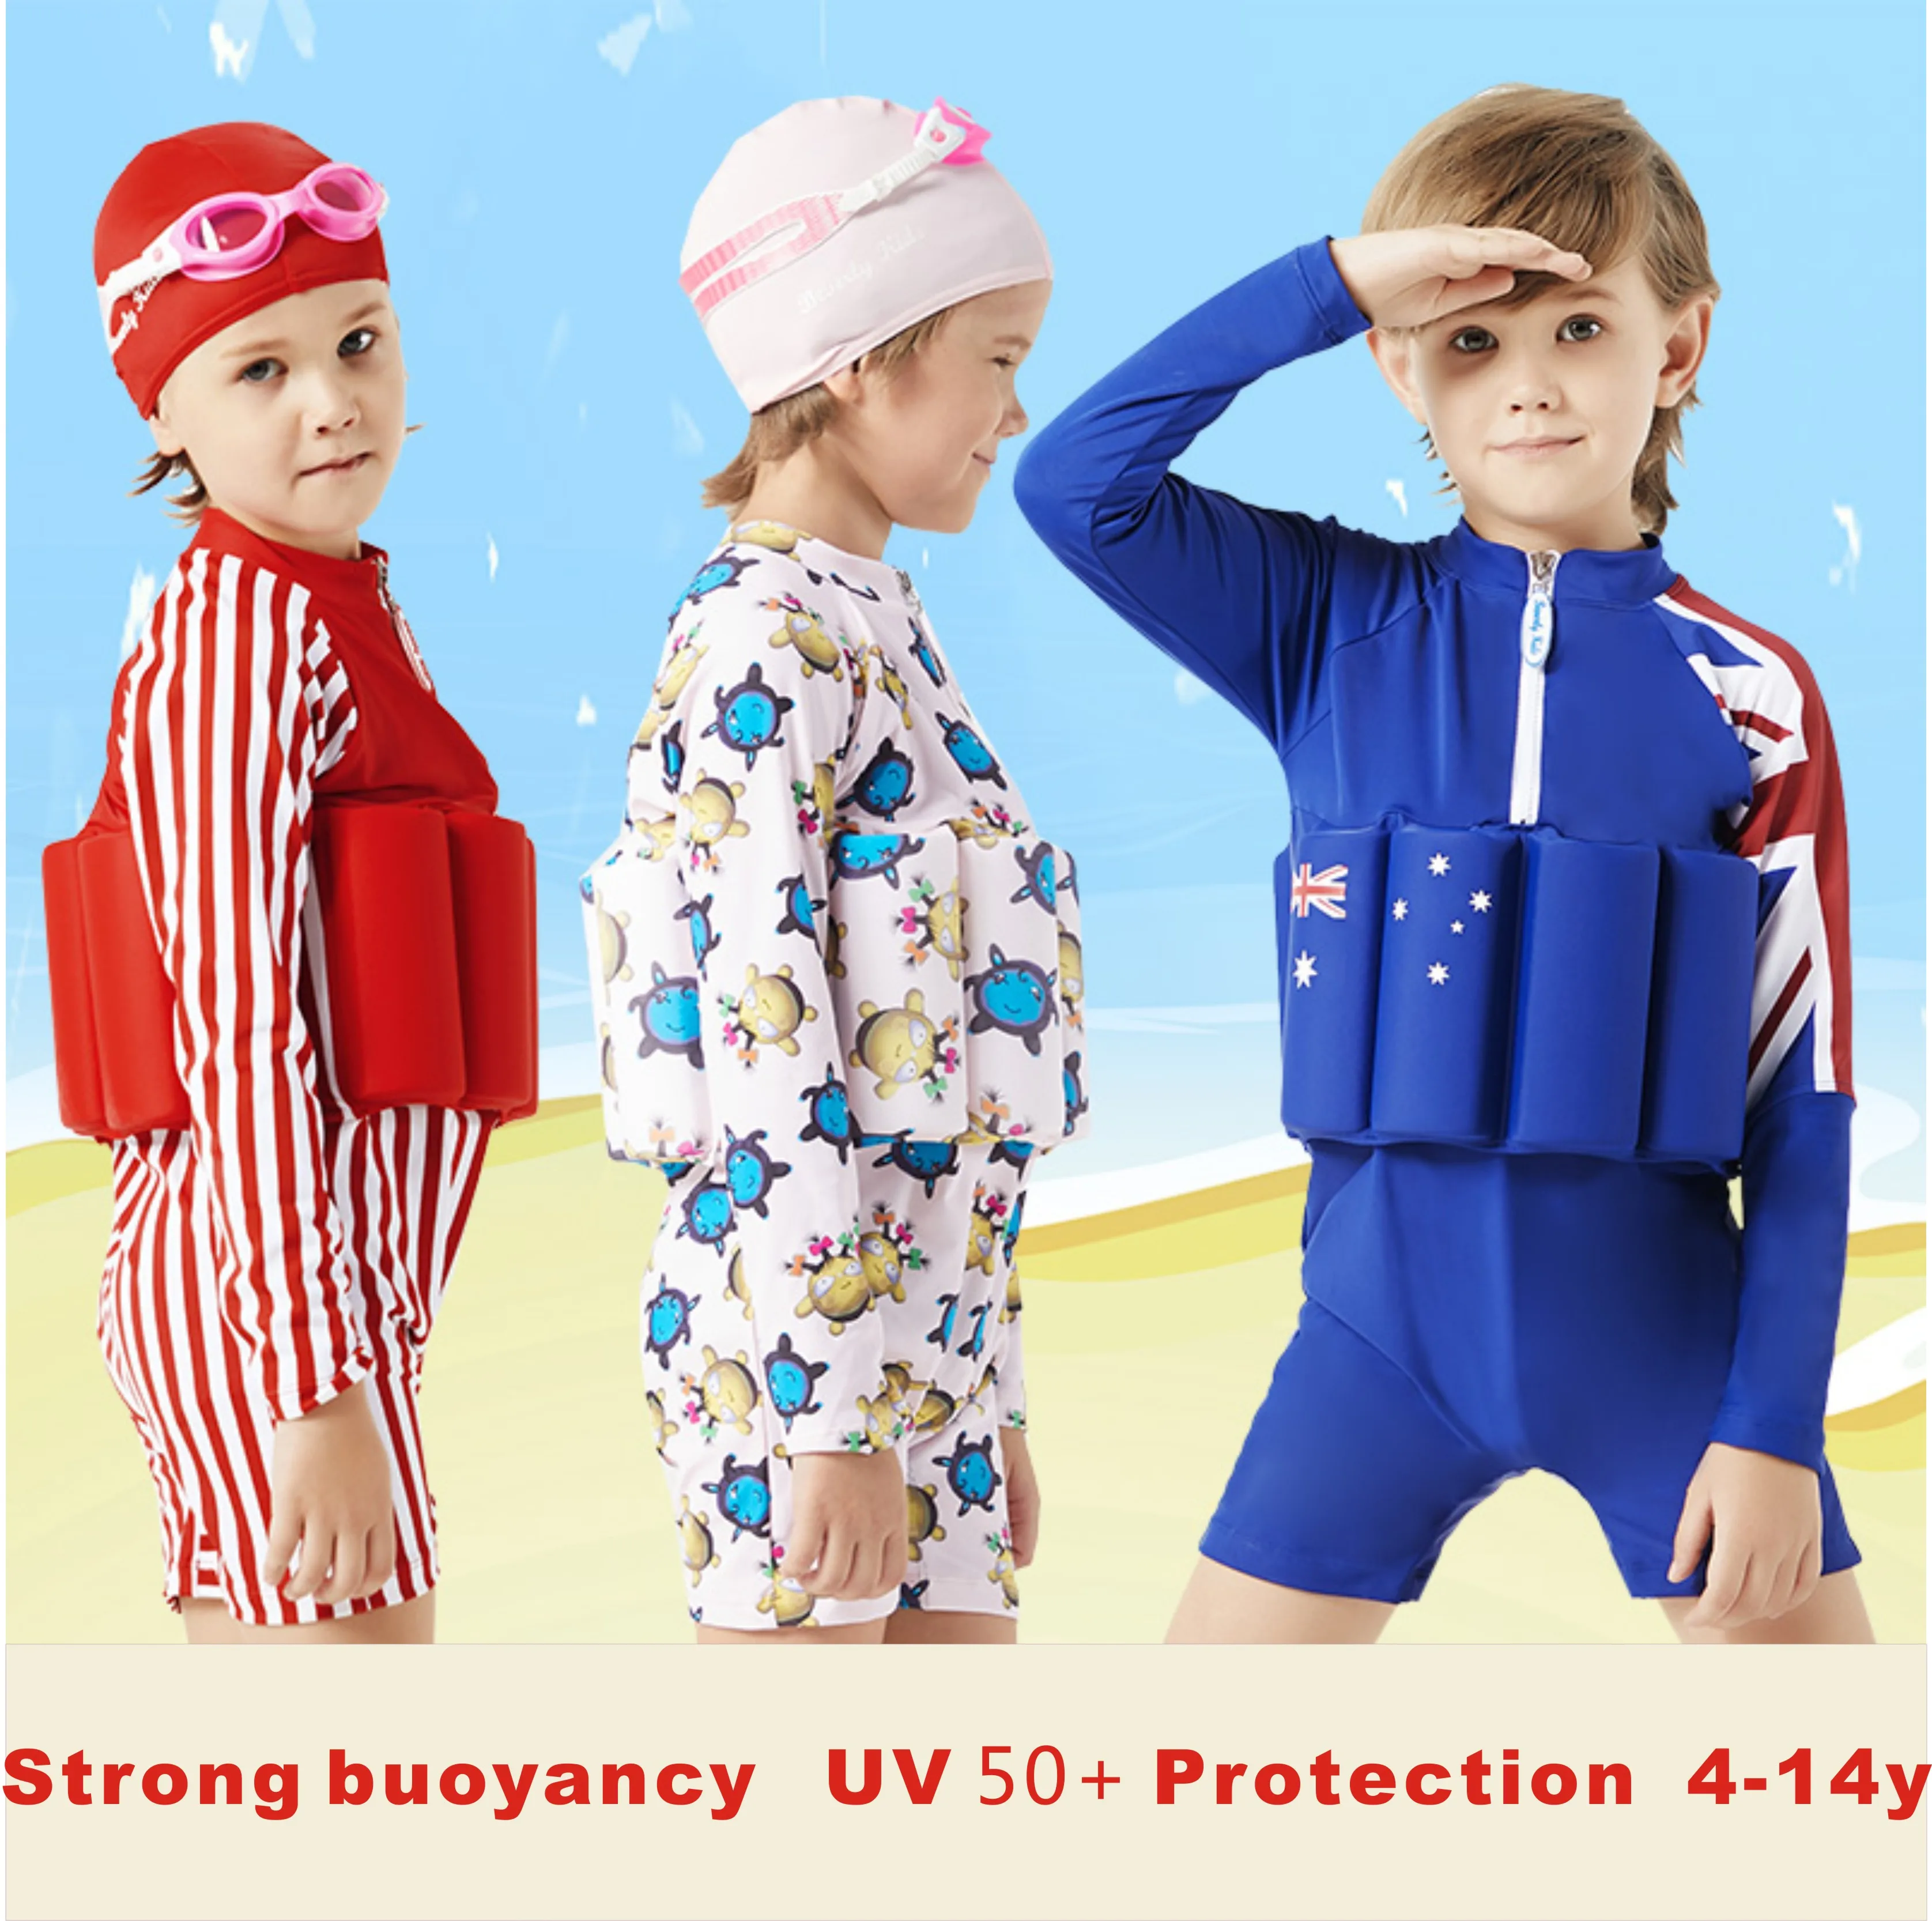 

Beverly kids swimsuit children UV protection floating swimwear life vest buoyancy suit junior swimming suit free shipping